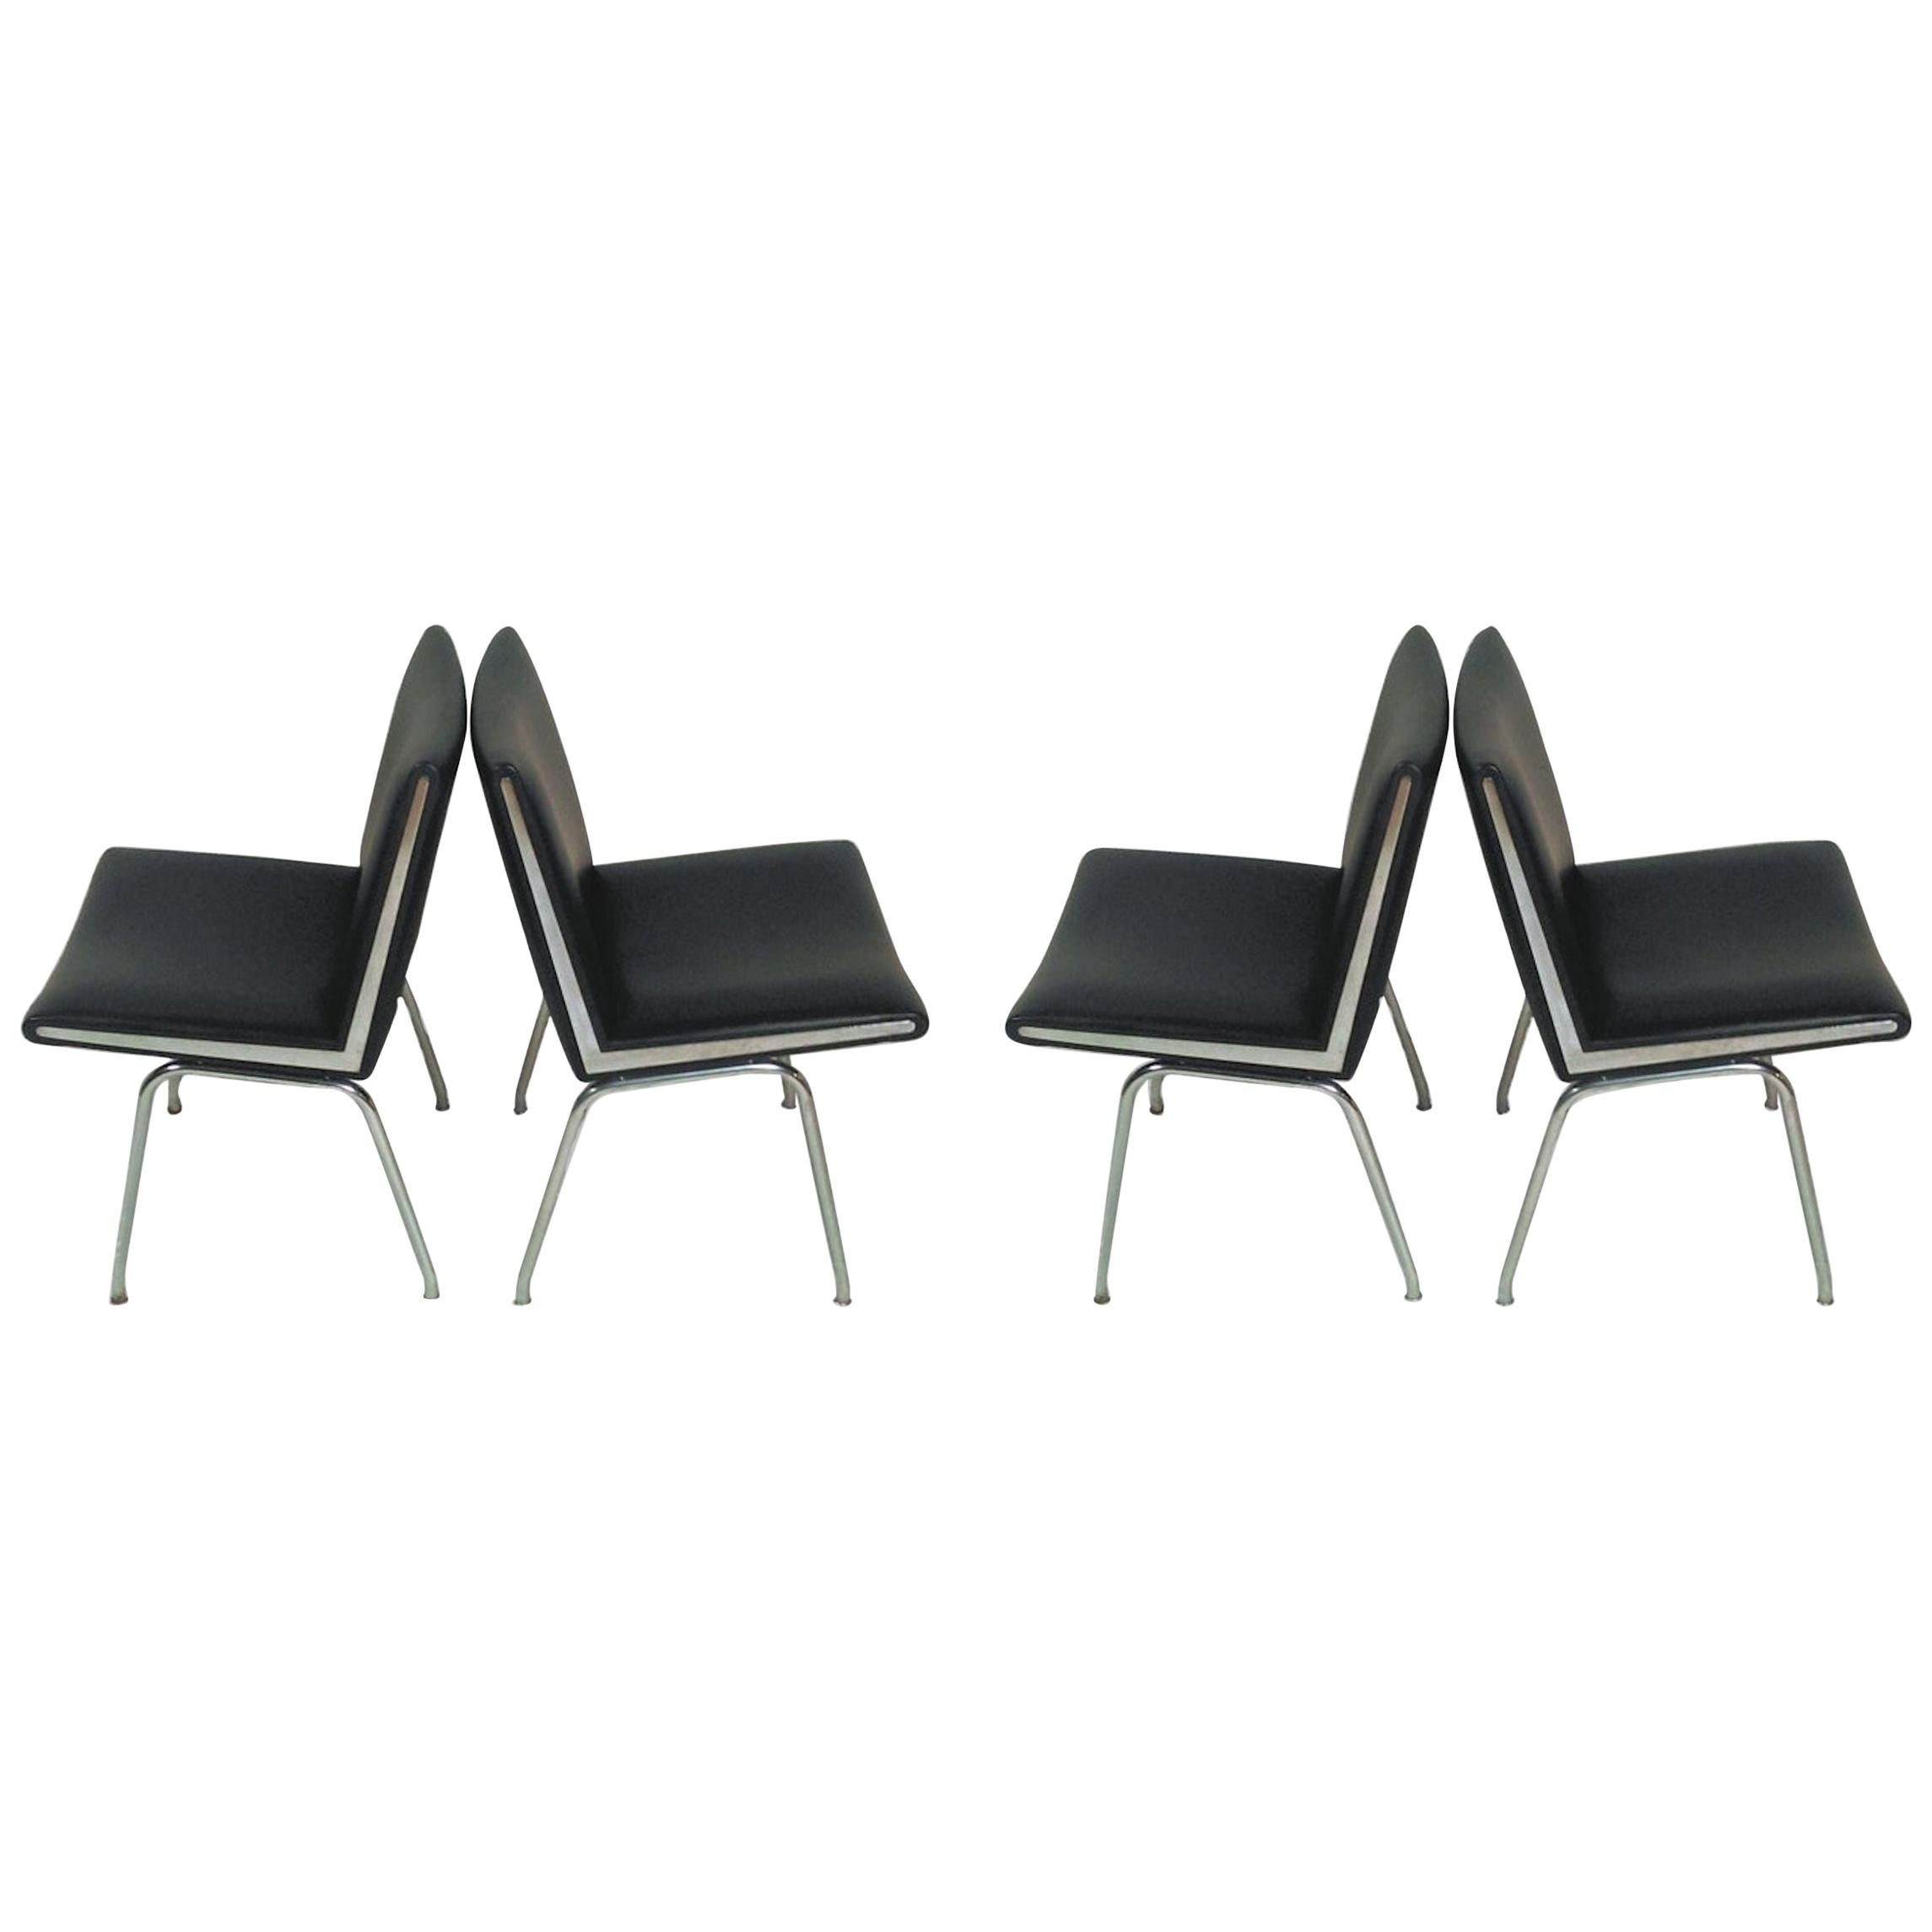 1960s Hans J. Wegner Set of Four Airport Lounge Chairs in Black by A.P. Stolen